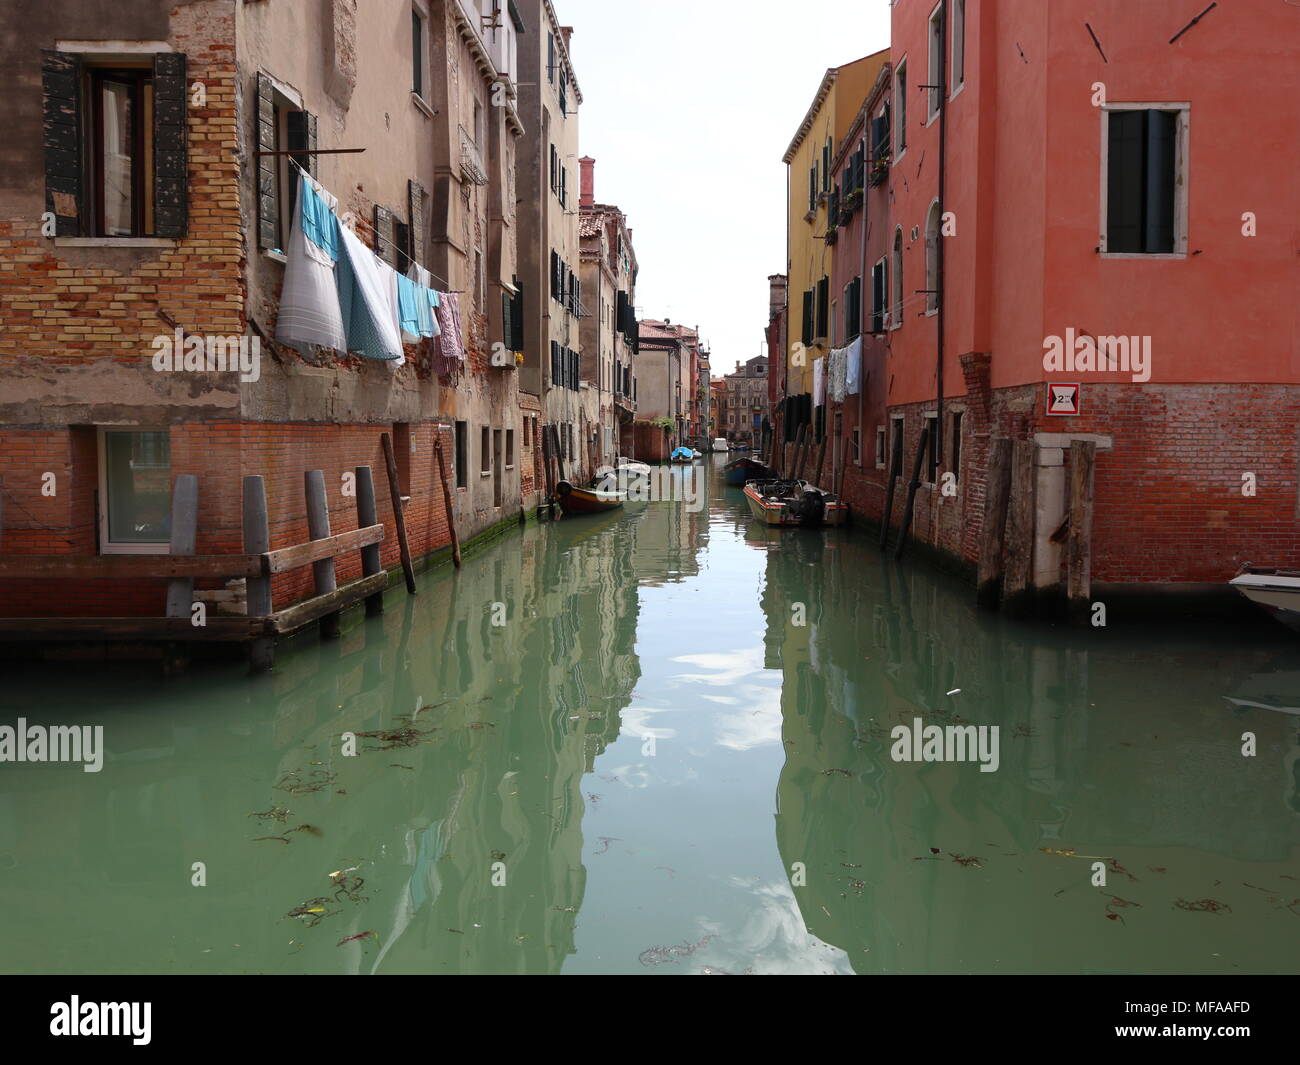 Small canal in Venice, reflection on the calm water, clothesline, picturesque scenery, Italy, Europe Stock Photo